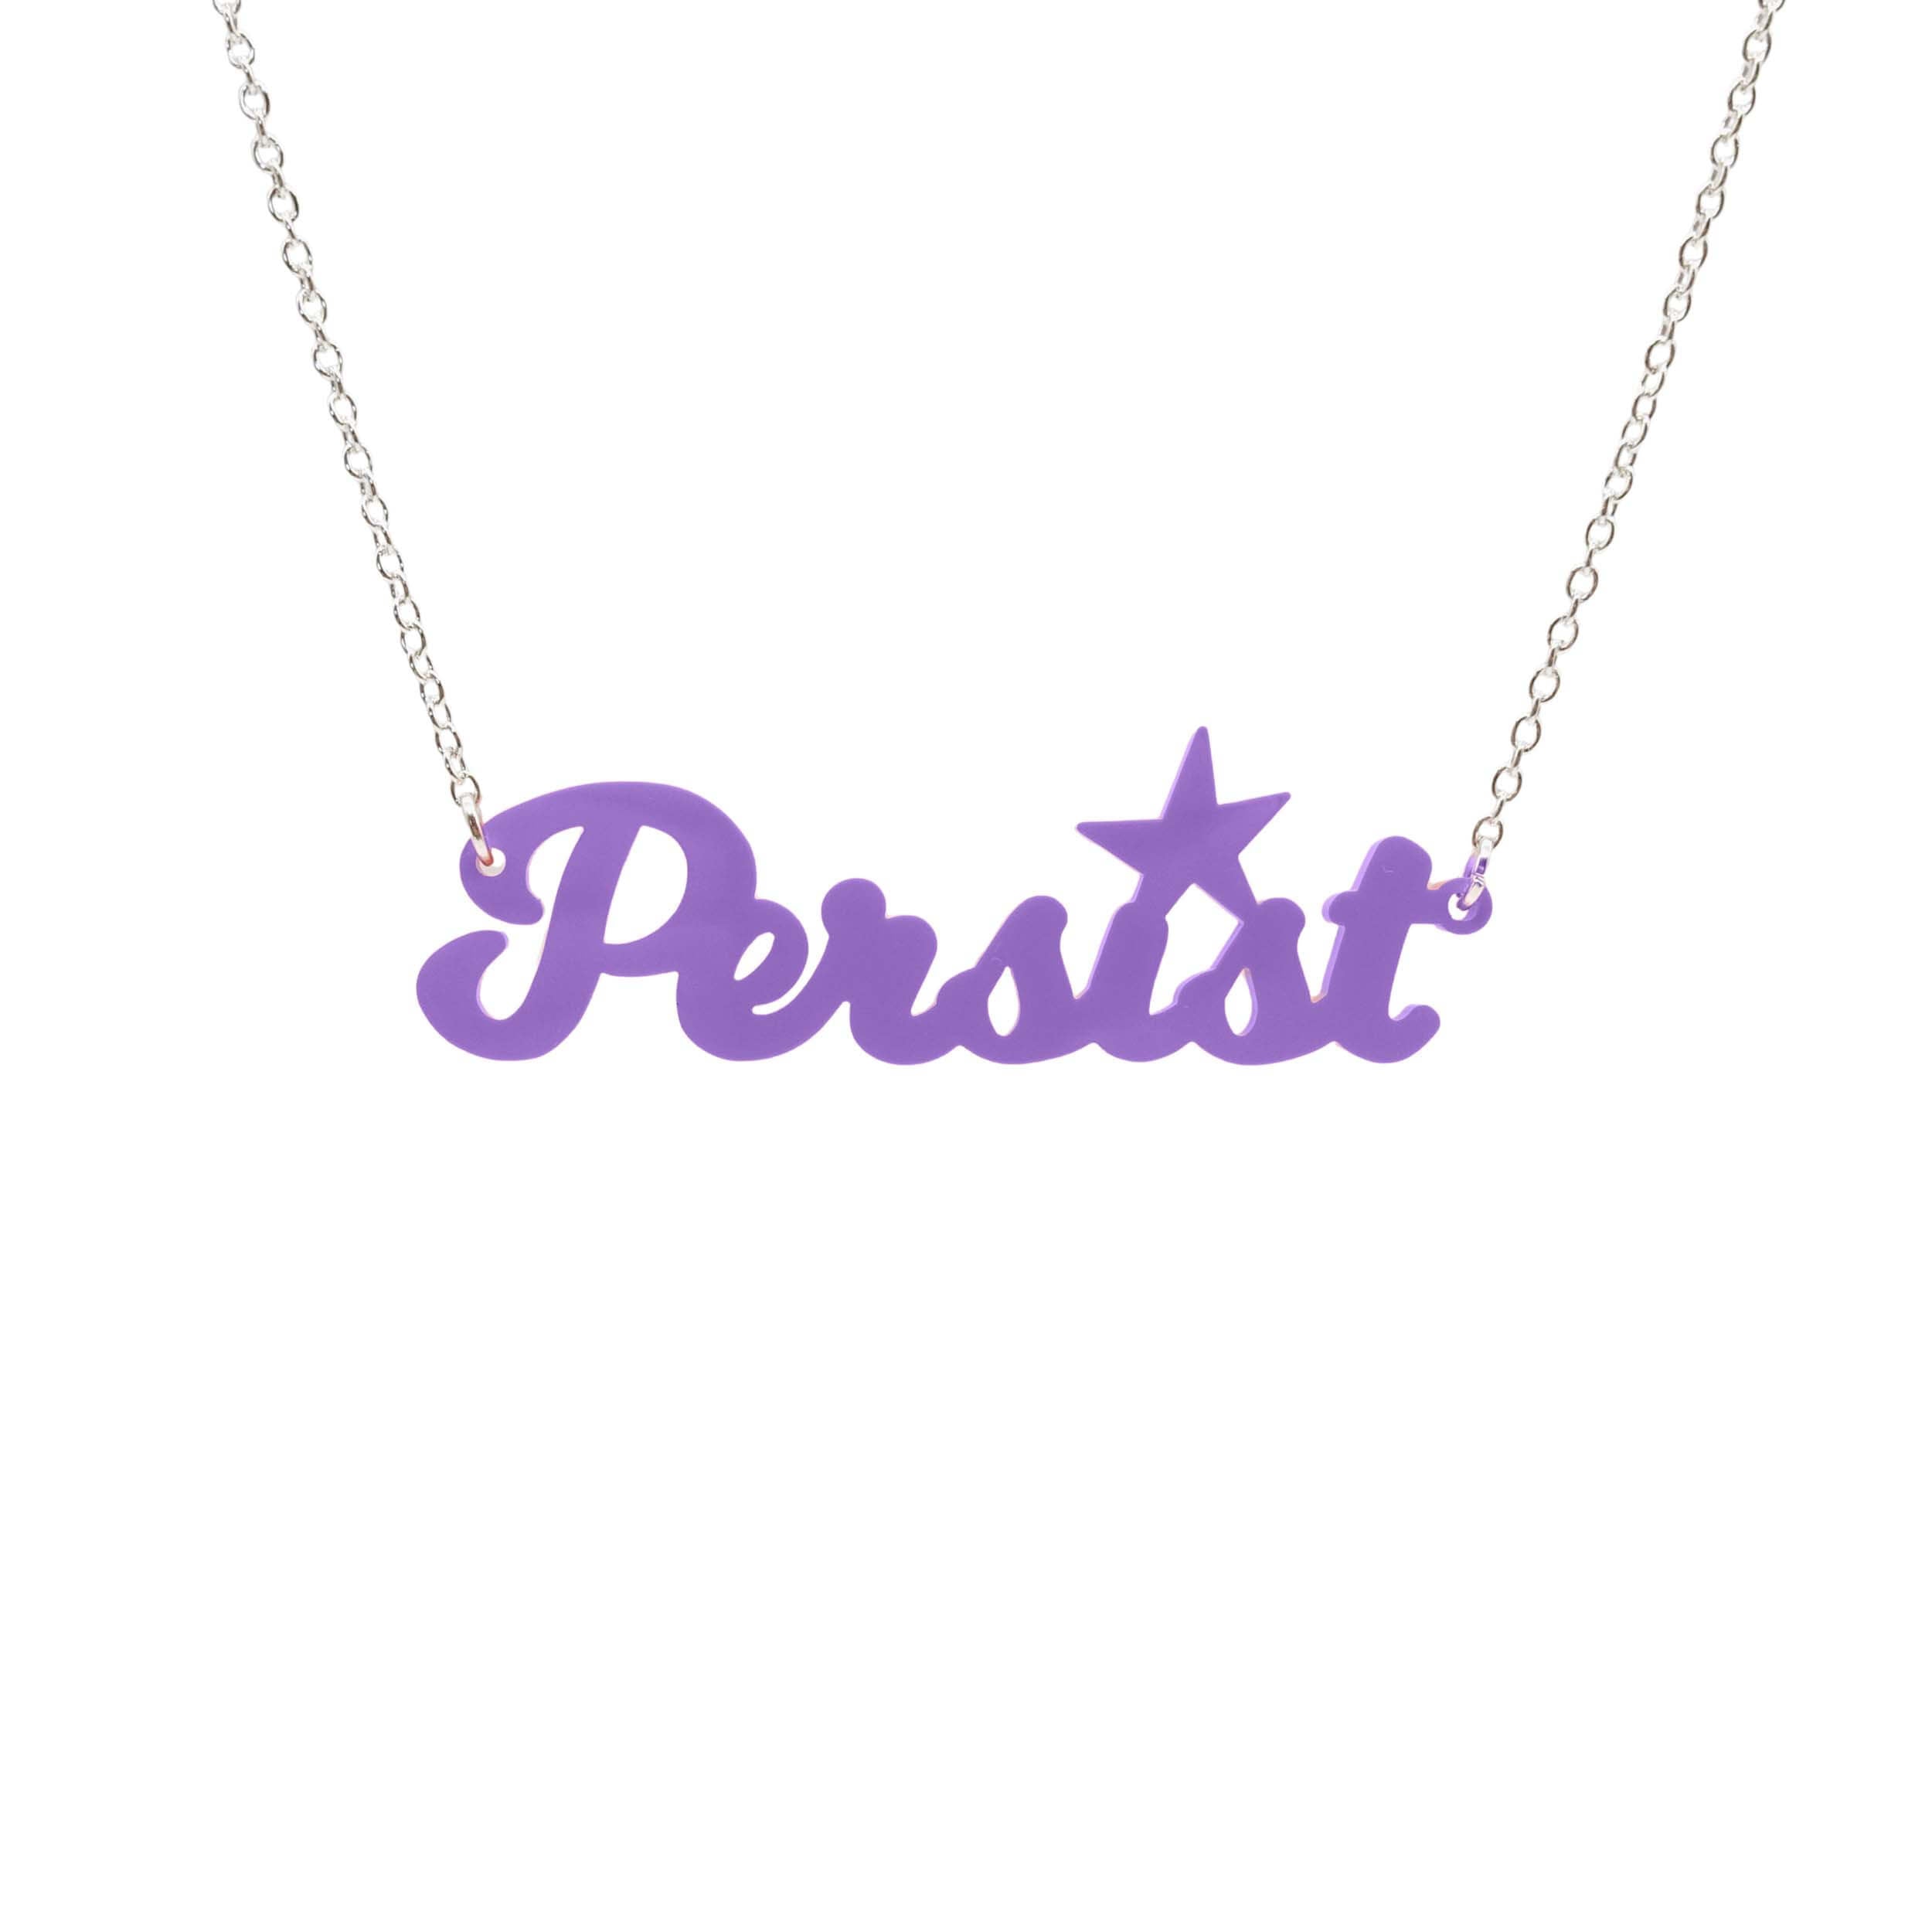 Persist necklace in script font in parma violet, shown hanging on a white background. Join the Persisterhood! 